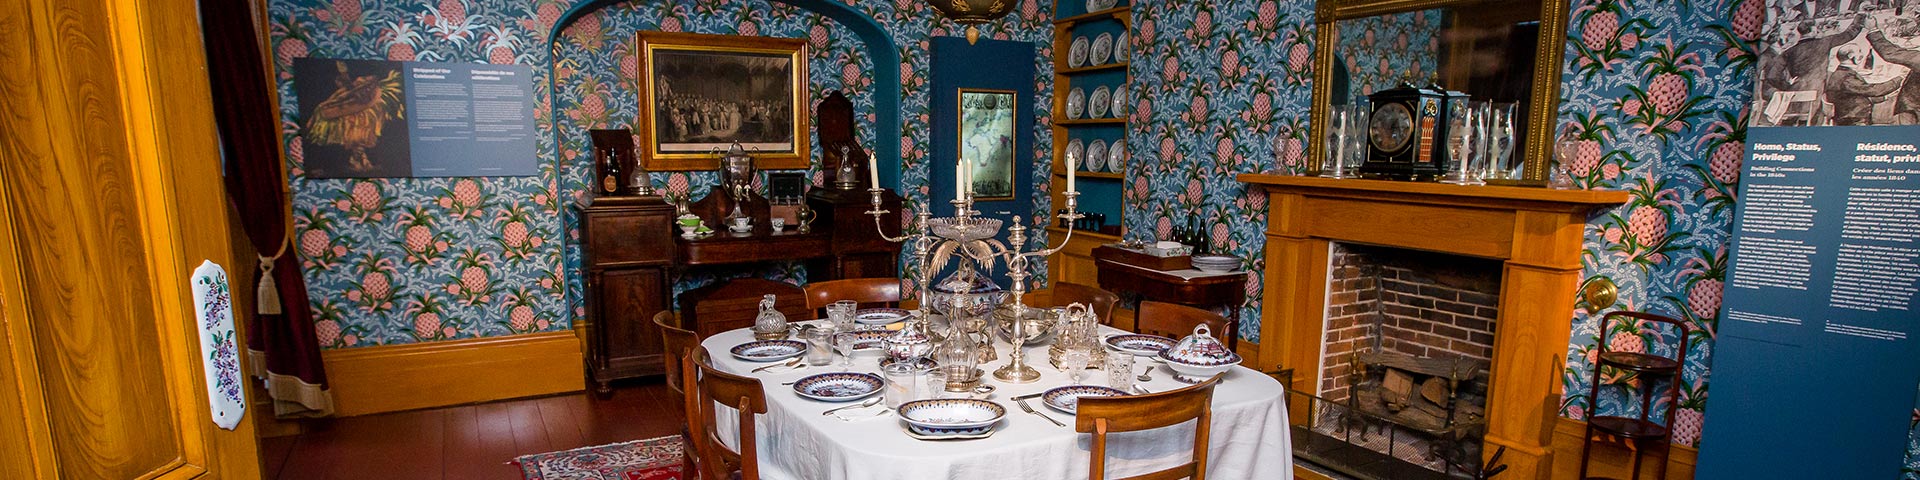 A historic dining room set for dinner. 